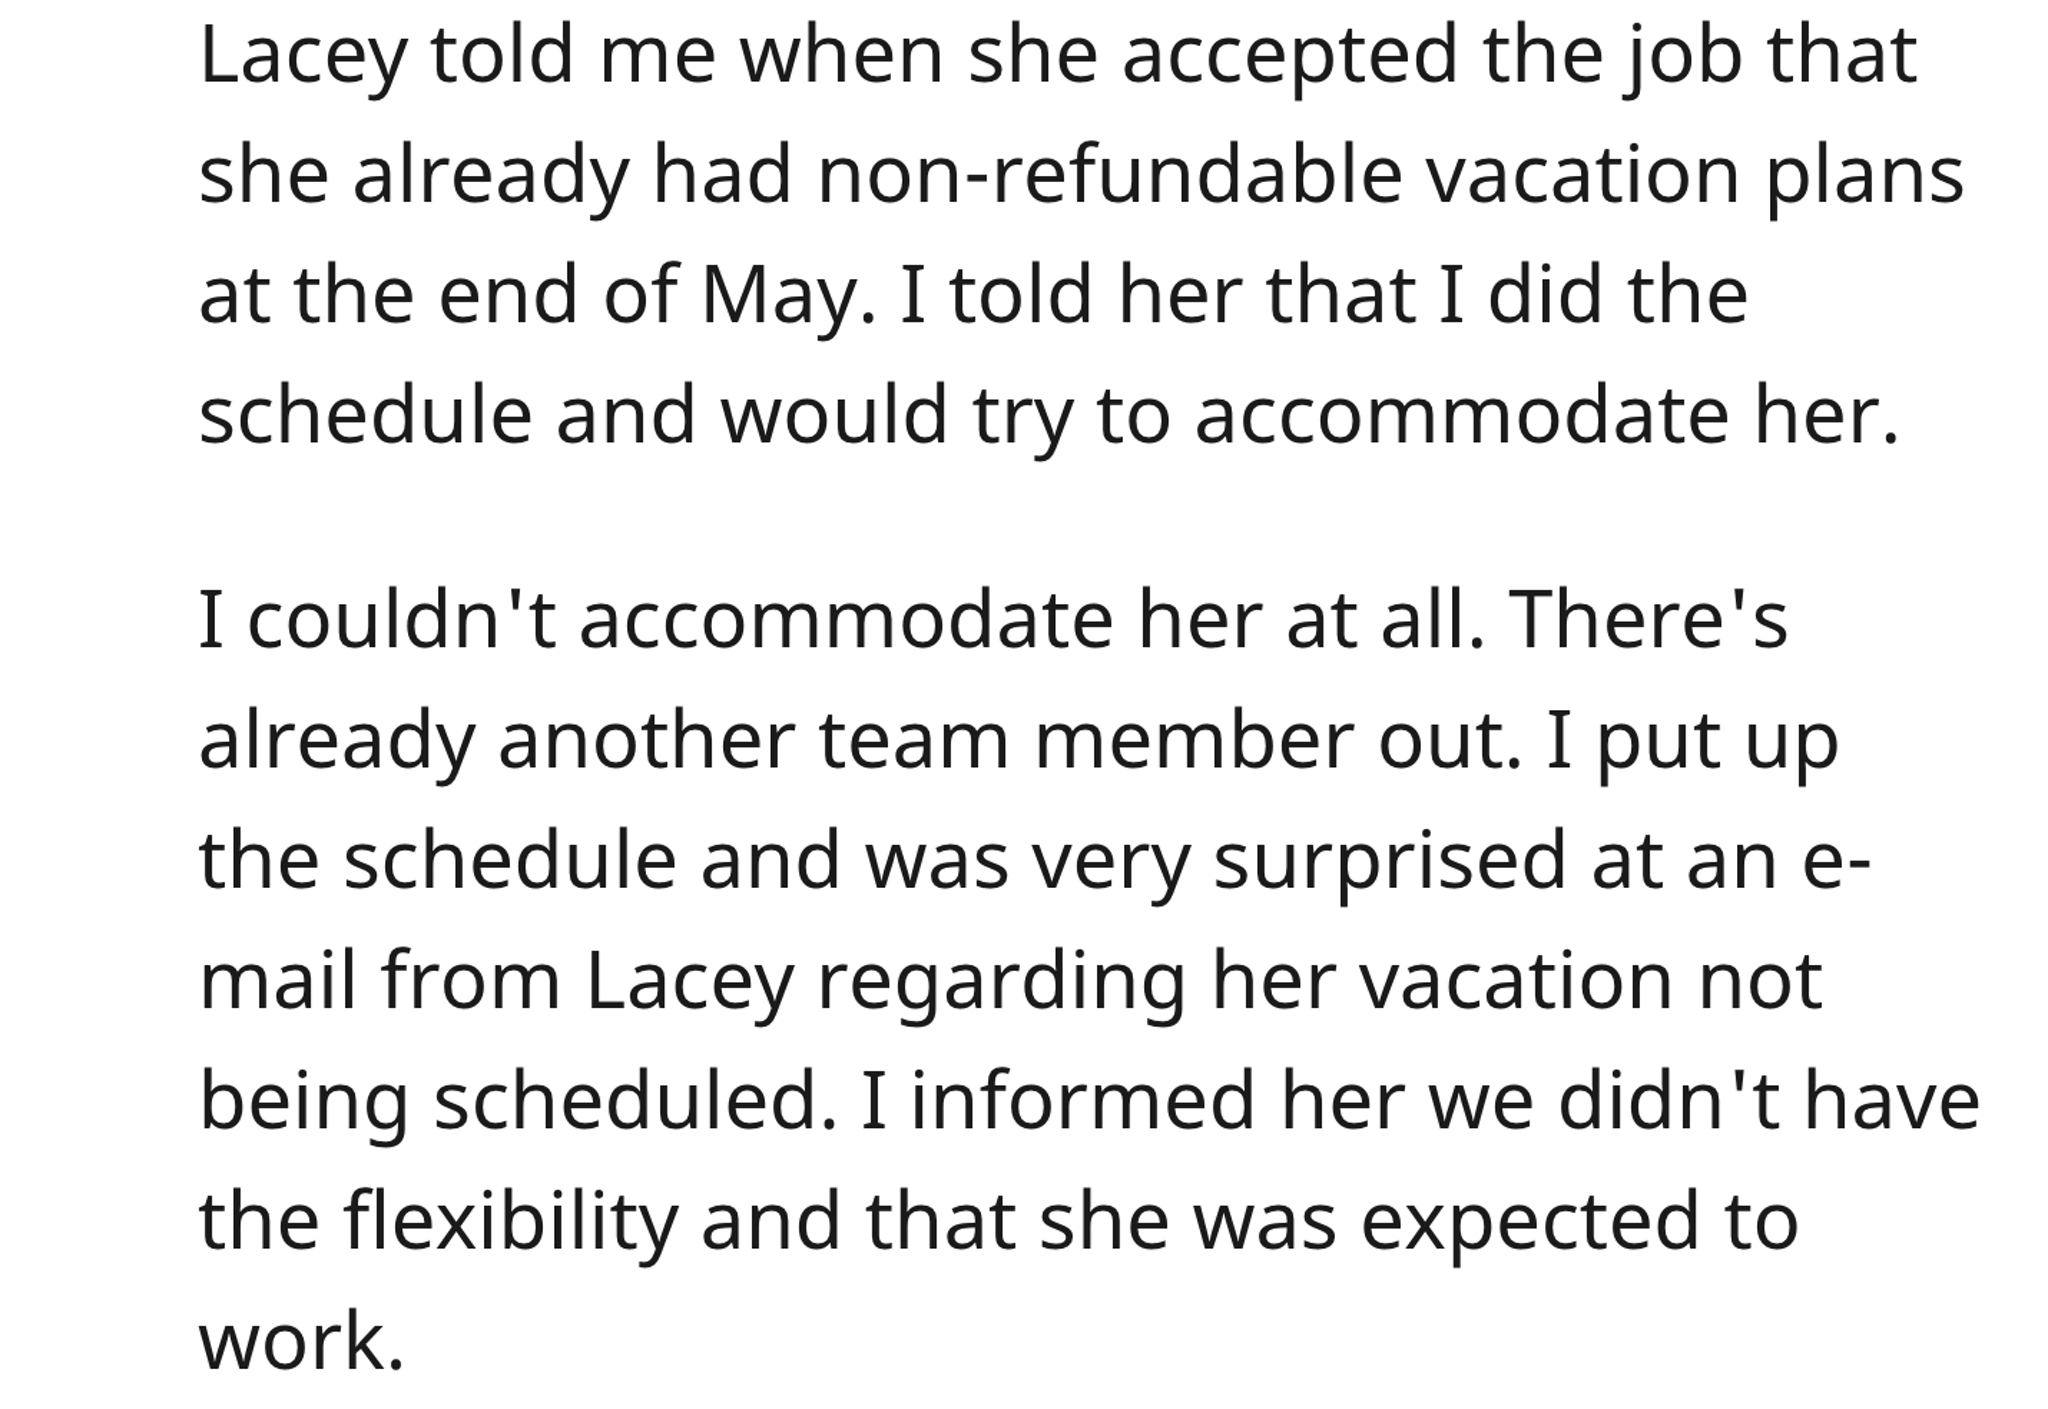 the schedule and was very surprised at an e- mail from Lacey regarding her vacation not